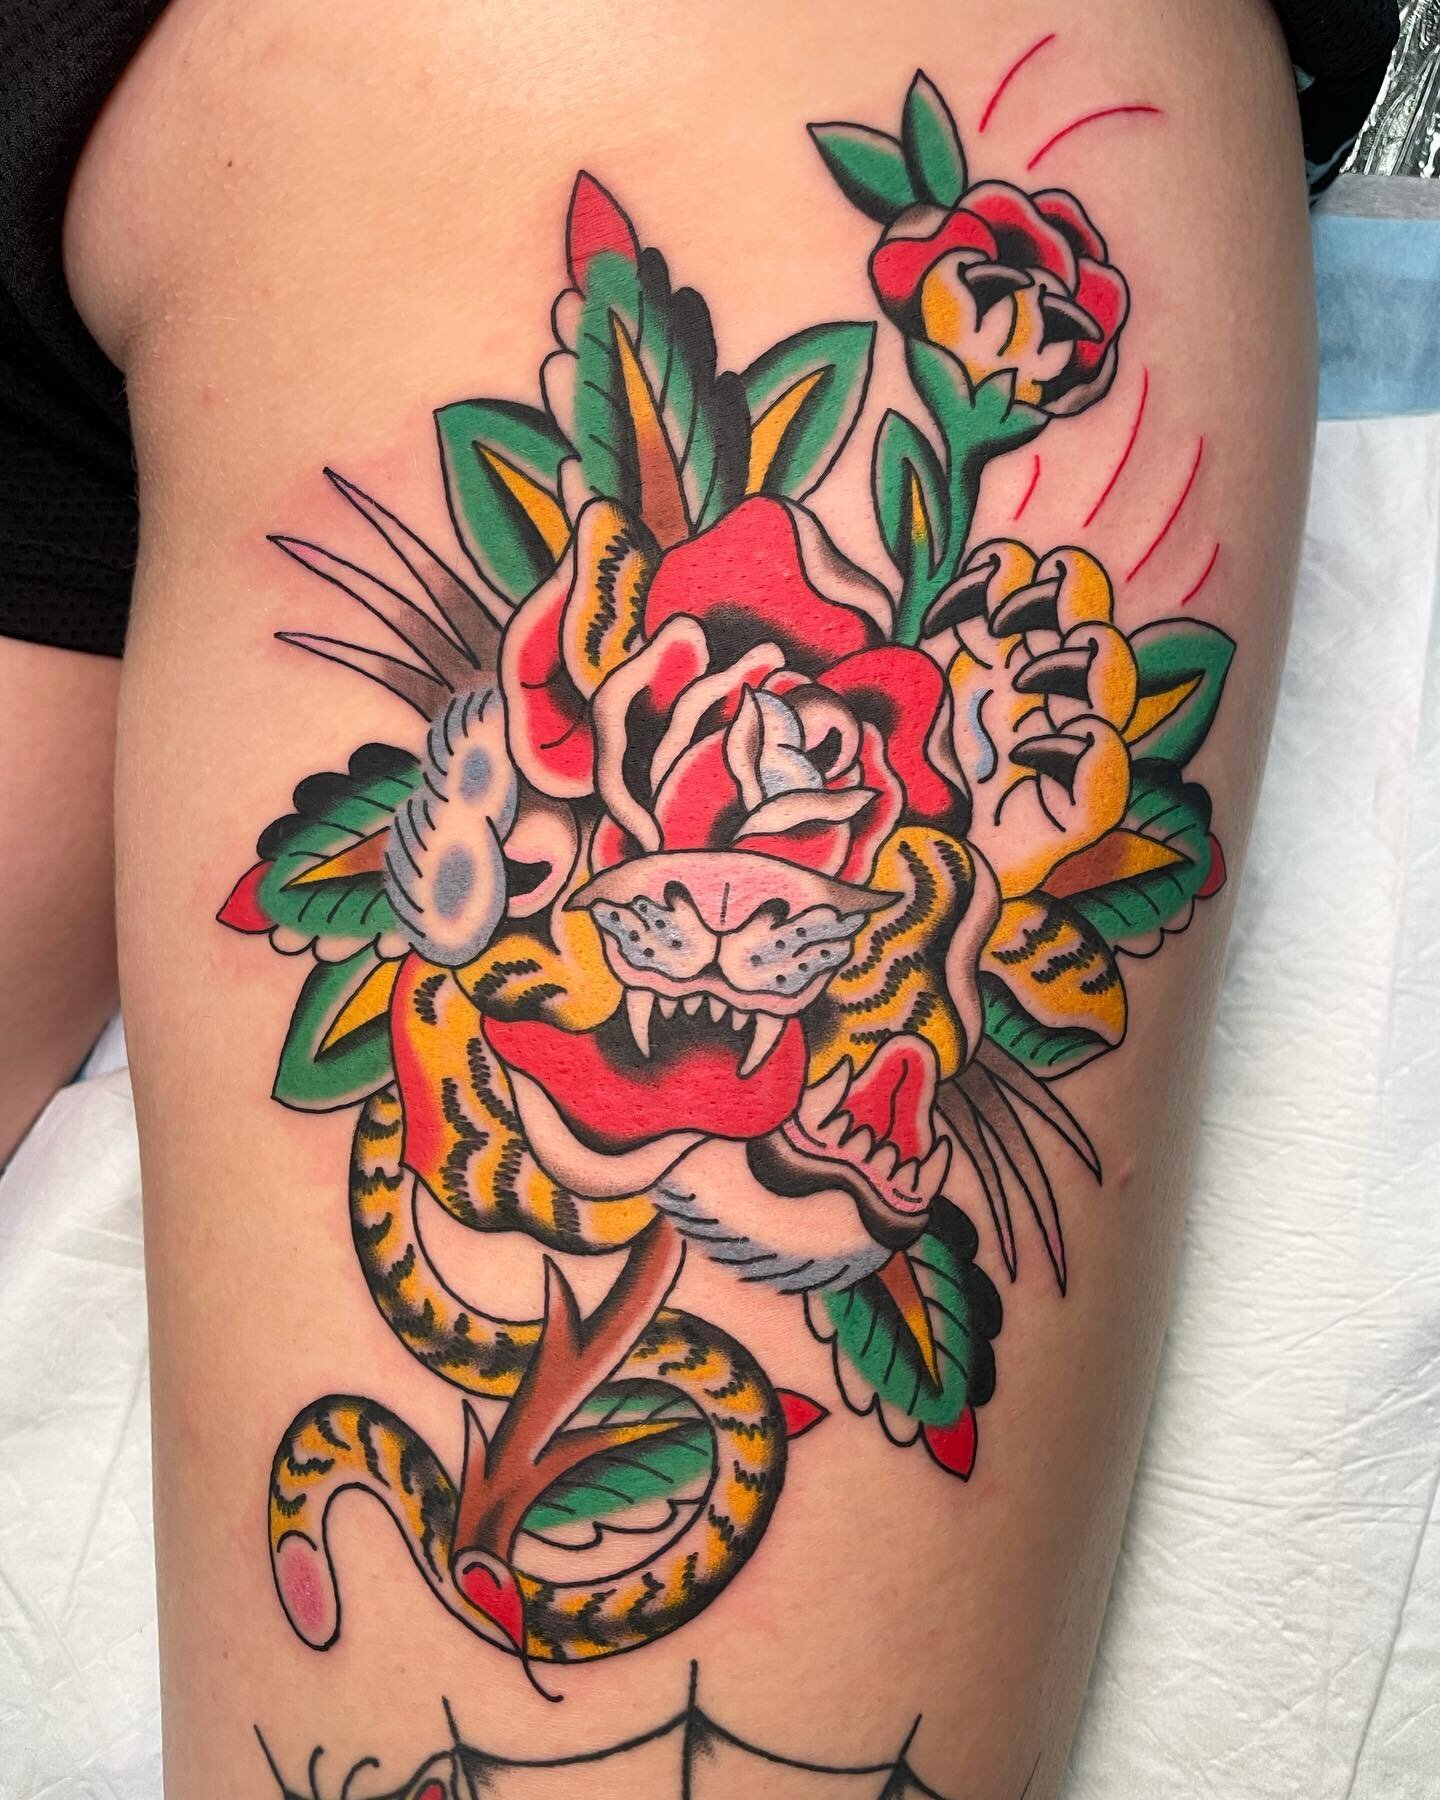 Tiger Rose morph made for Tyla @wa.ink.tattoo 
I&rsquo;m now taking bookings for March 💫
.
.
.
#traditionaltattoo #fremantletattoo #tigerrose #chromatattooink #irontempertattoosupplies